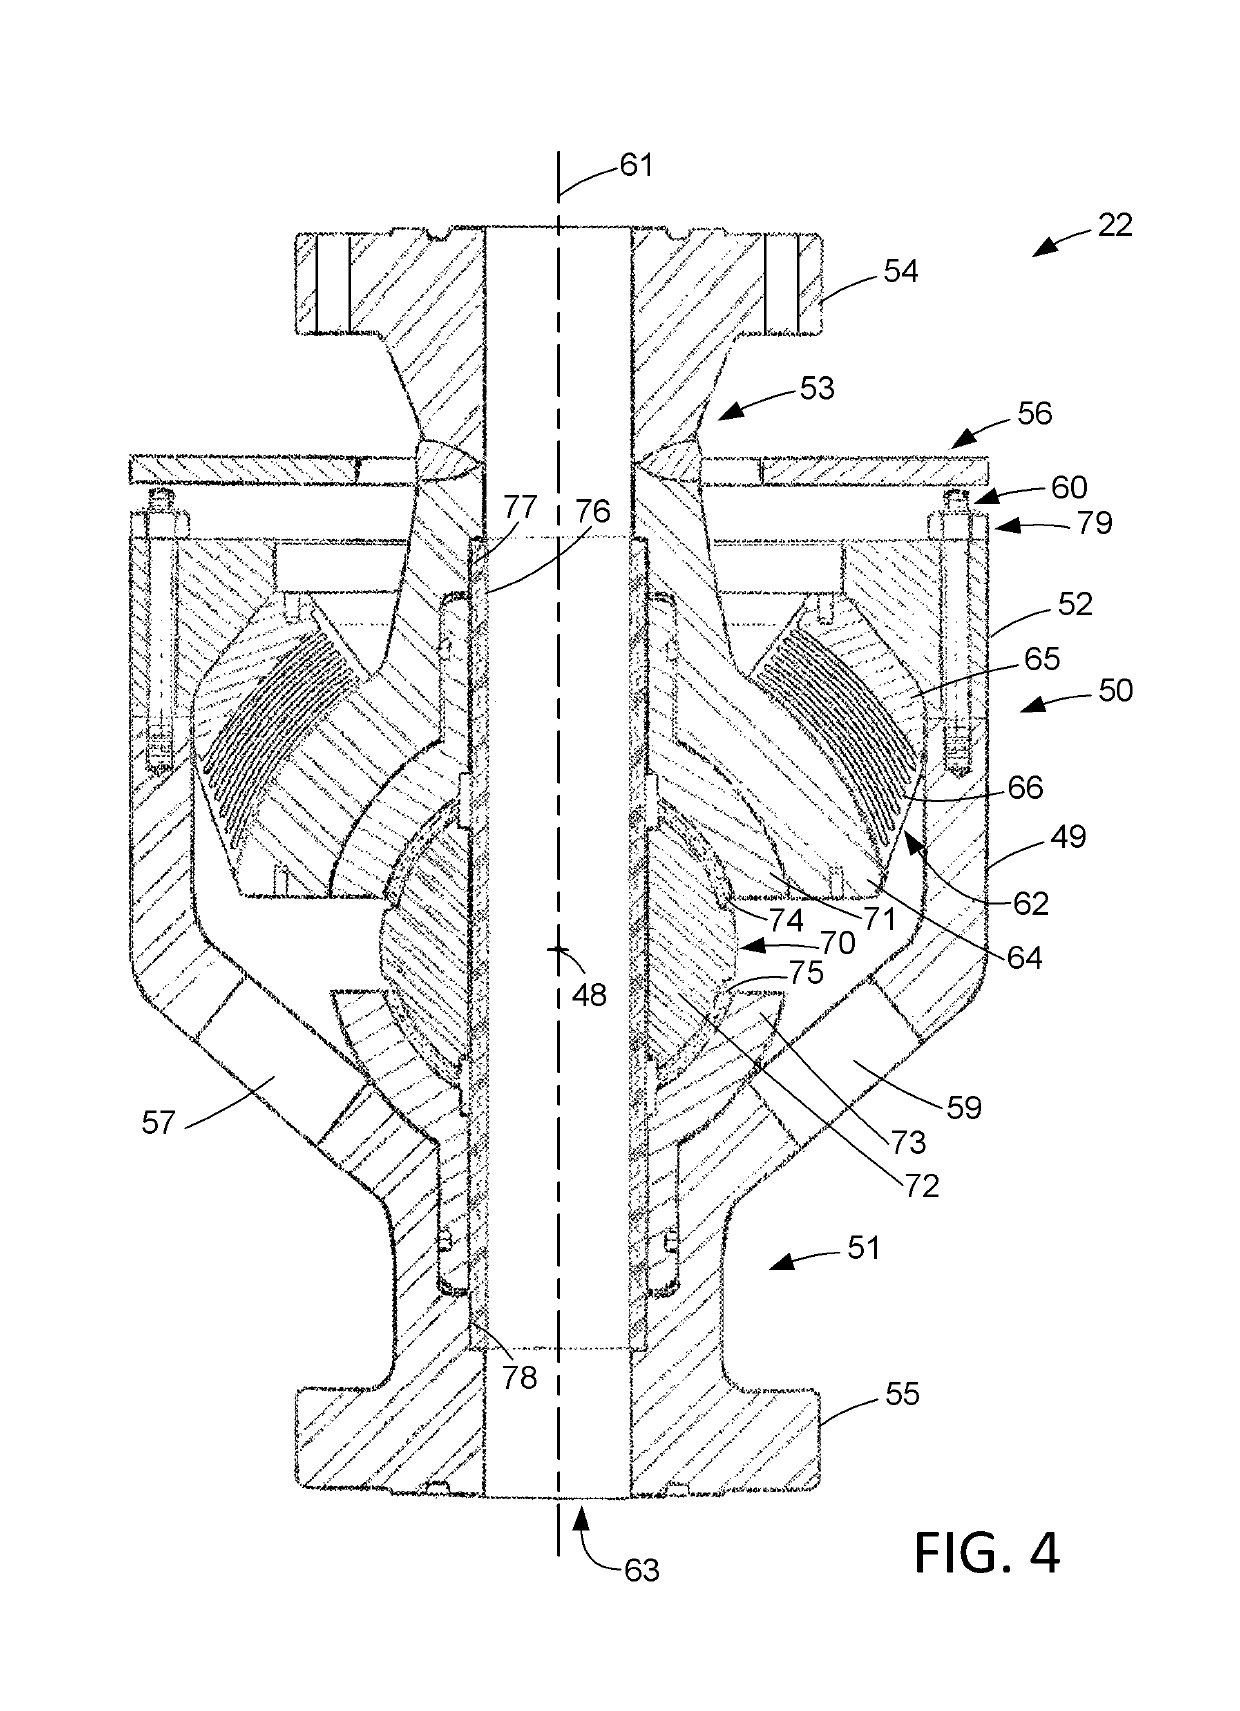 Flexible pipe joint having an annular flexible boot thermally or chemically insulating an annular elastomeric flexible element